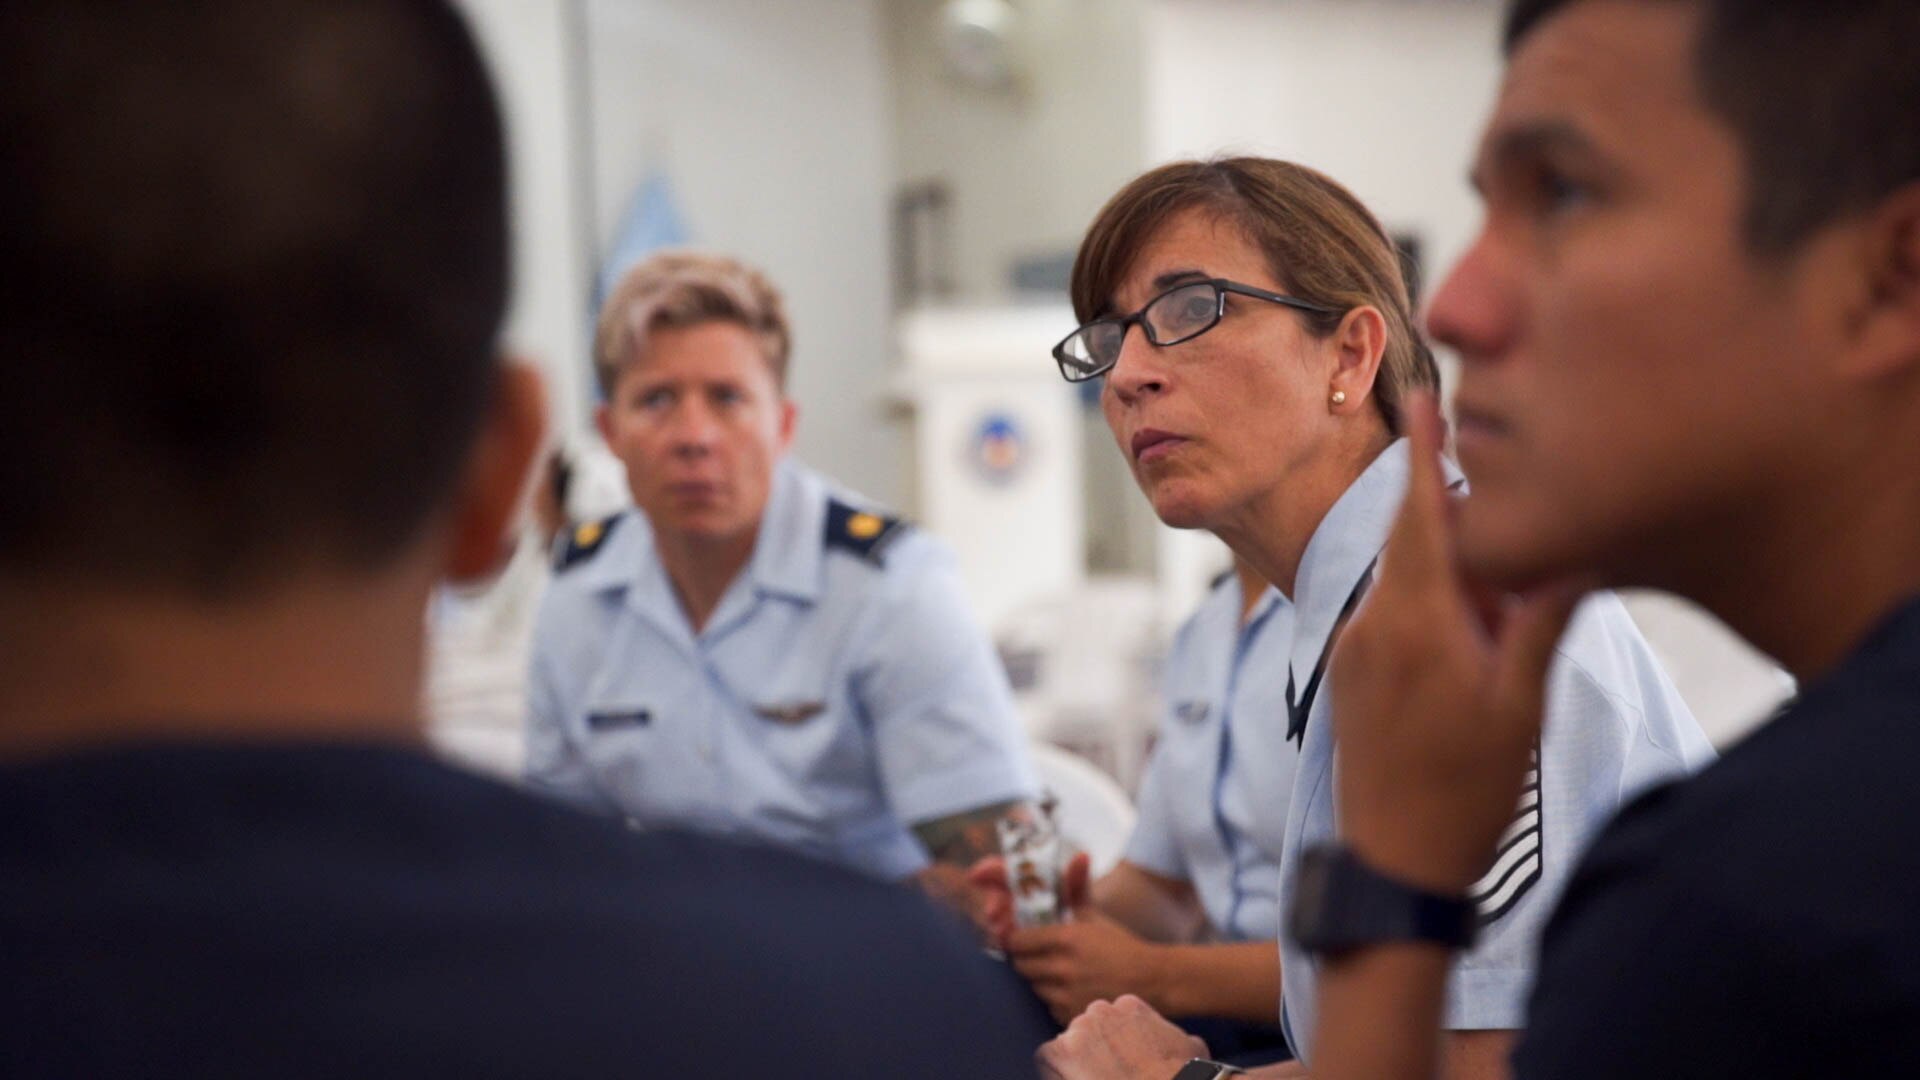 Senior Master Sgt. Felicita Sueiras, Physiology Program Superintendent, Joint Base San Antonio-Randolph, Texas, participates in a discussion with Peruvian medical personnel during a subject matter expert exchange in Lima, Peru, May 17, 2017.  The goal of the global health exchange is to share best practices, enhance relationships, and build partnership capacities. (U.S. Air Force photo by Danny Rangel)